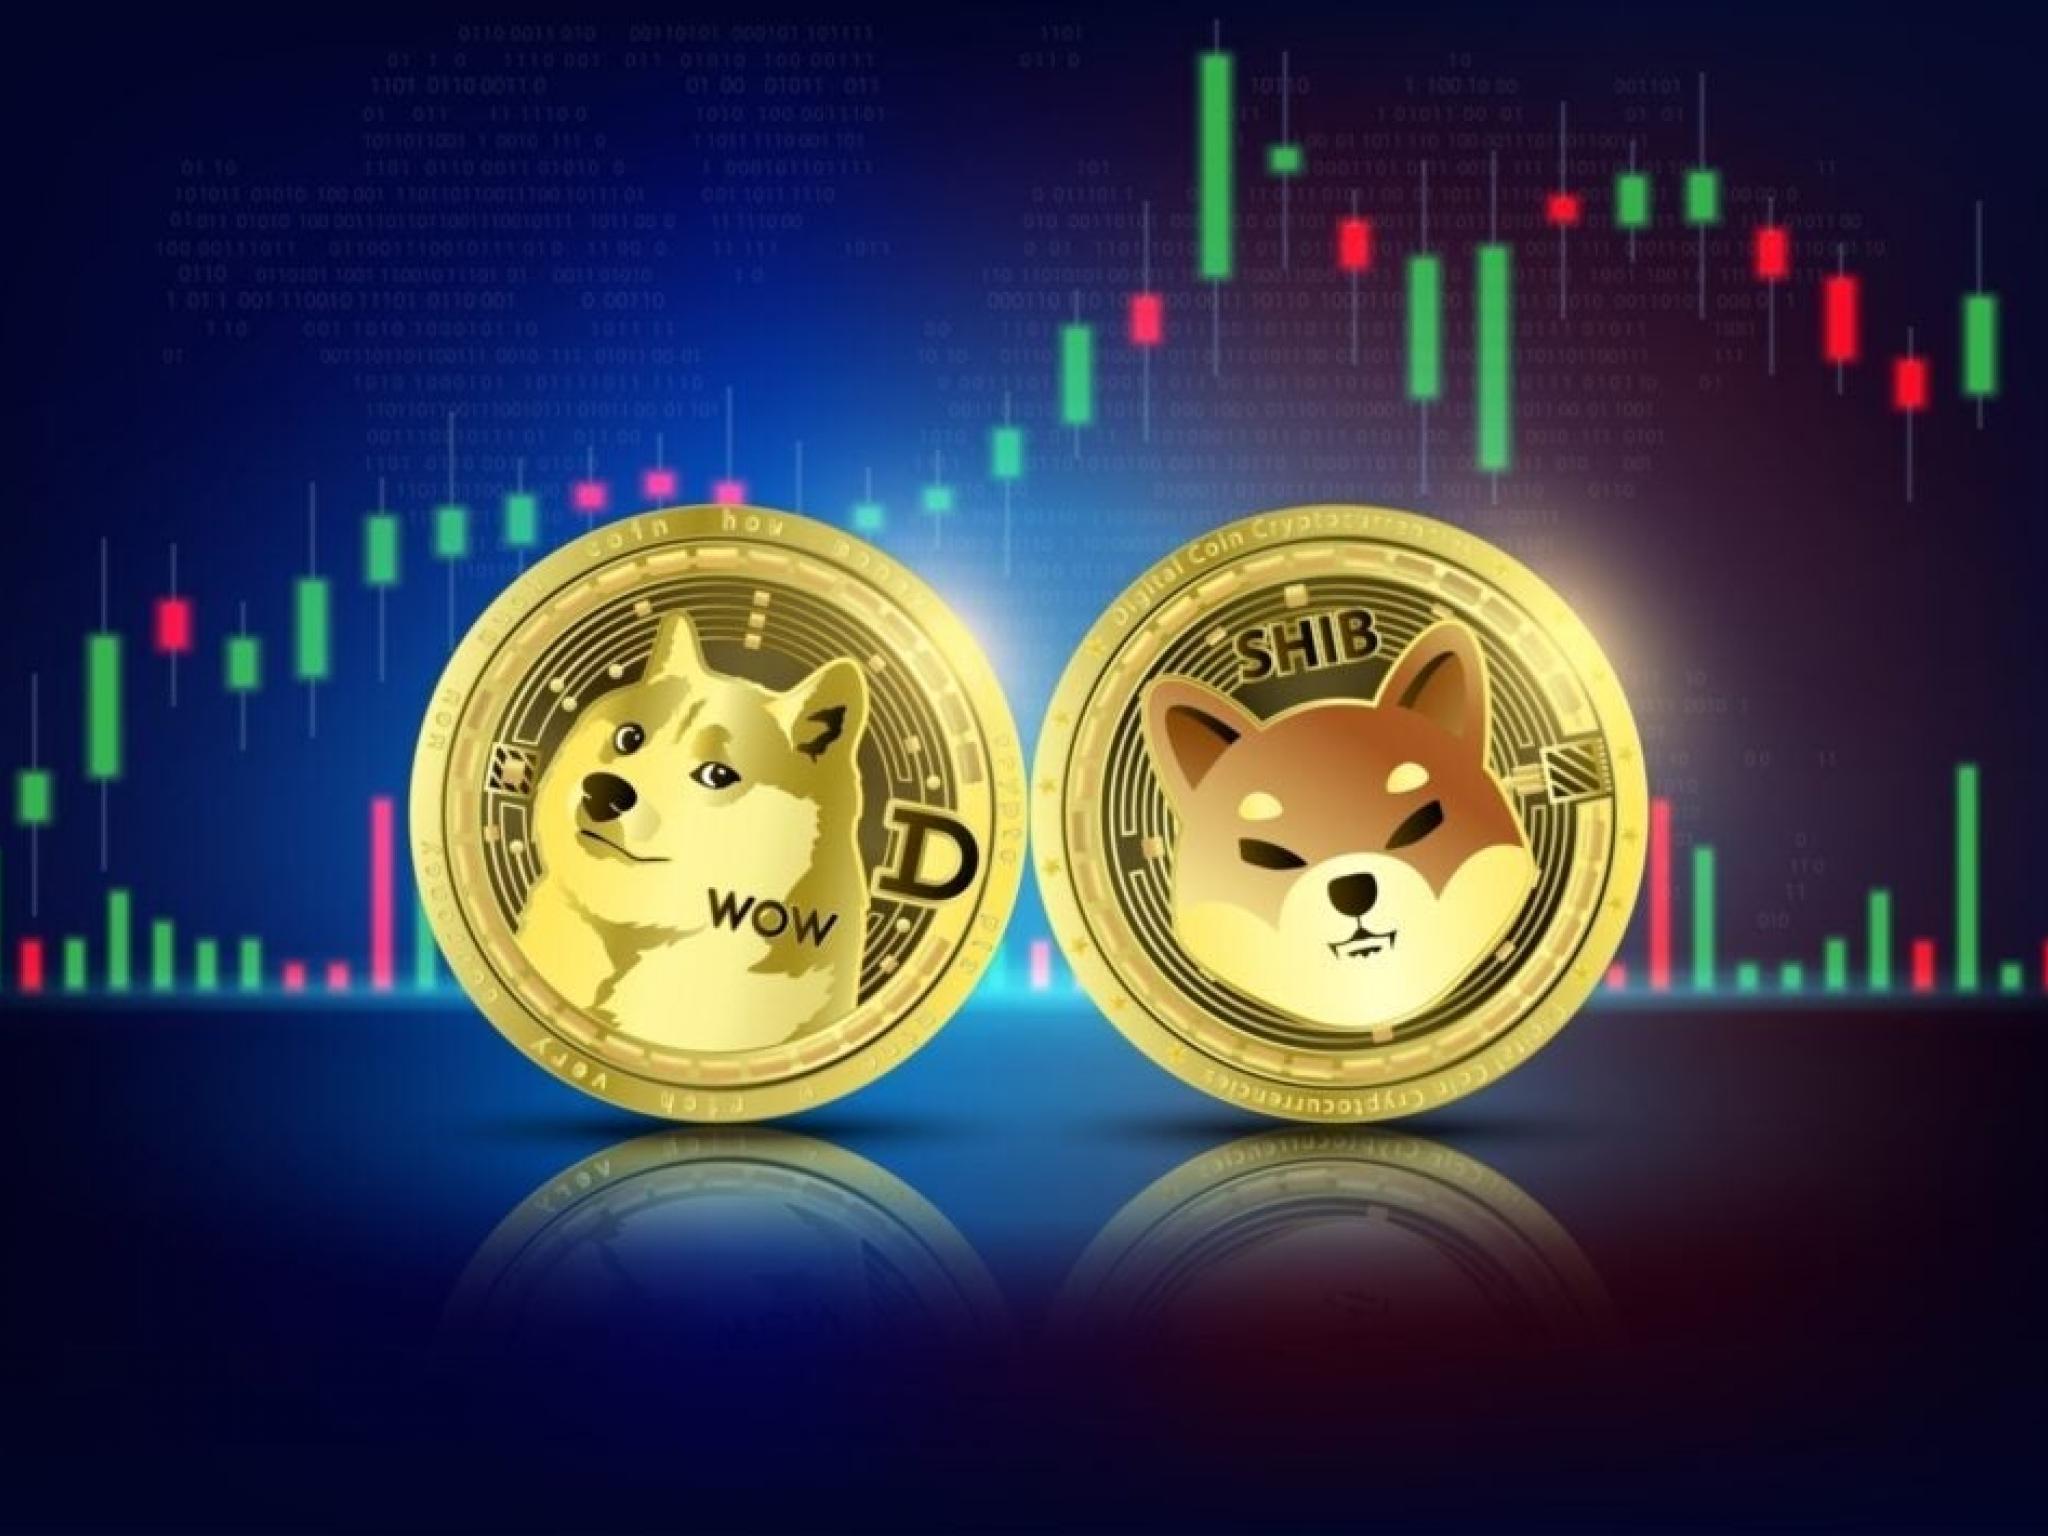  the-easy-days-in-crypto-are-over-and-meme-coins-have-contributed-to-this-says-trader 